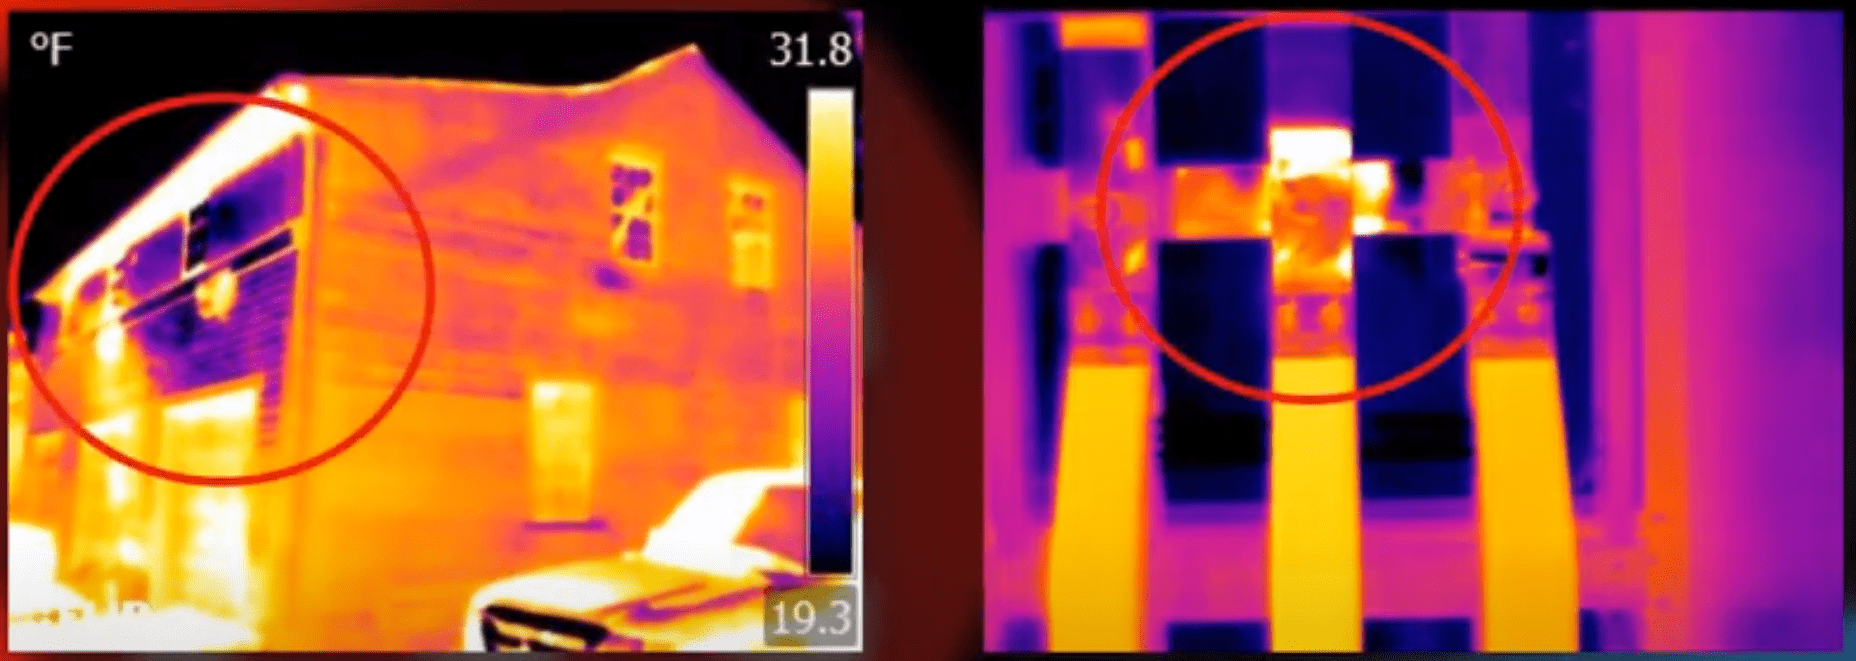 thermography infrared science.png